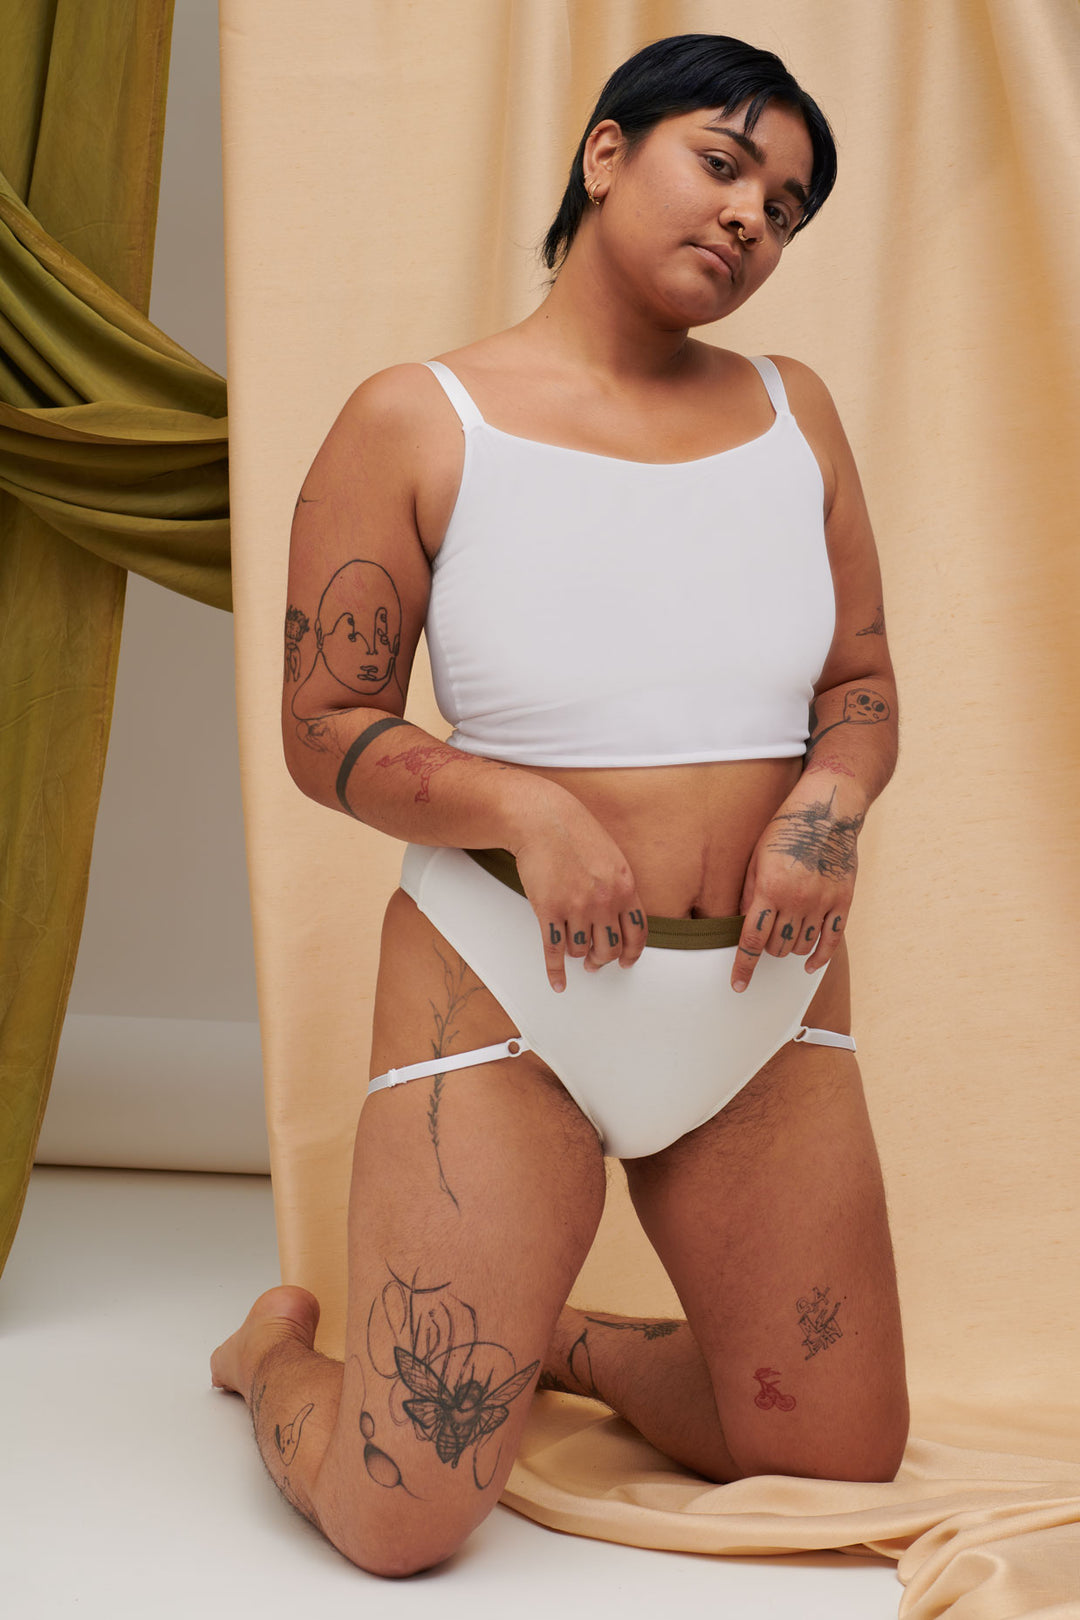 A Transgender Non-binary model look at the camera in the ortie sustainable collection mesh compression binder and ethical bamboo underwear. They look confident in their gender affirming chest binder